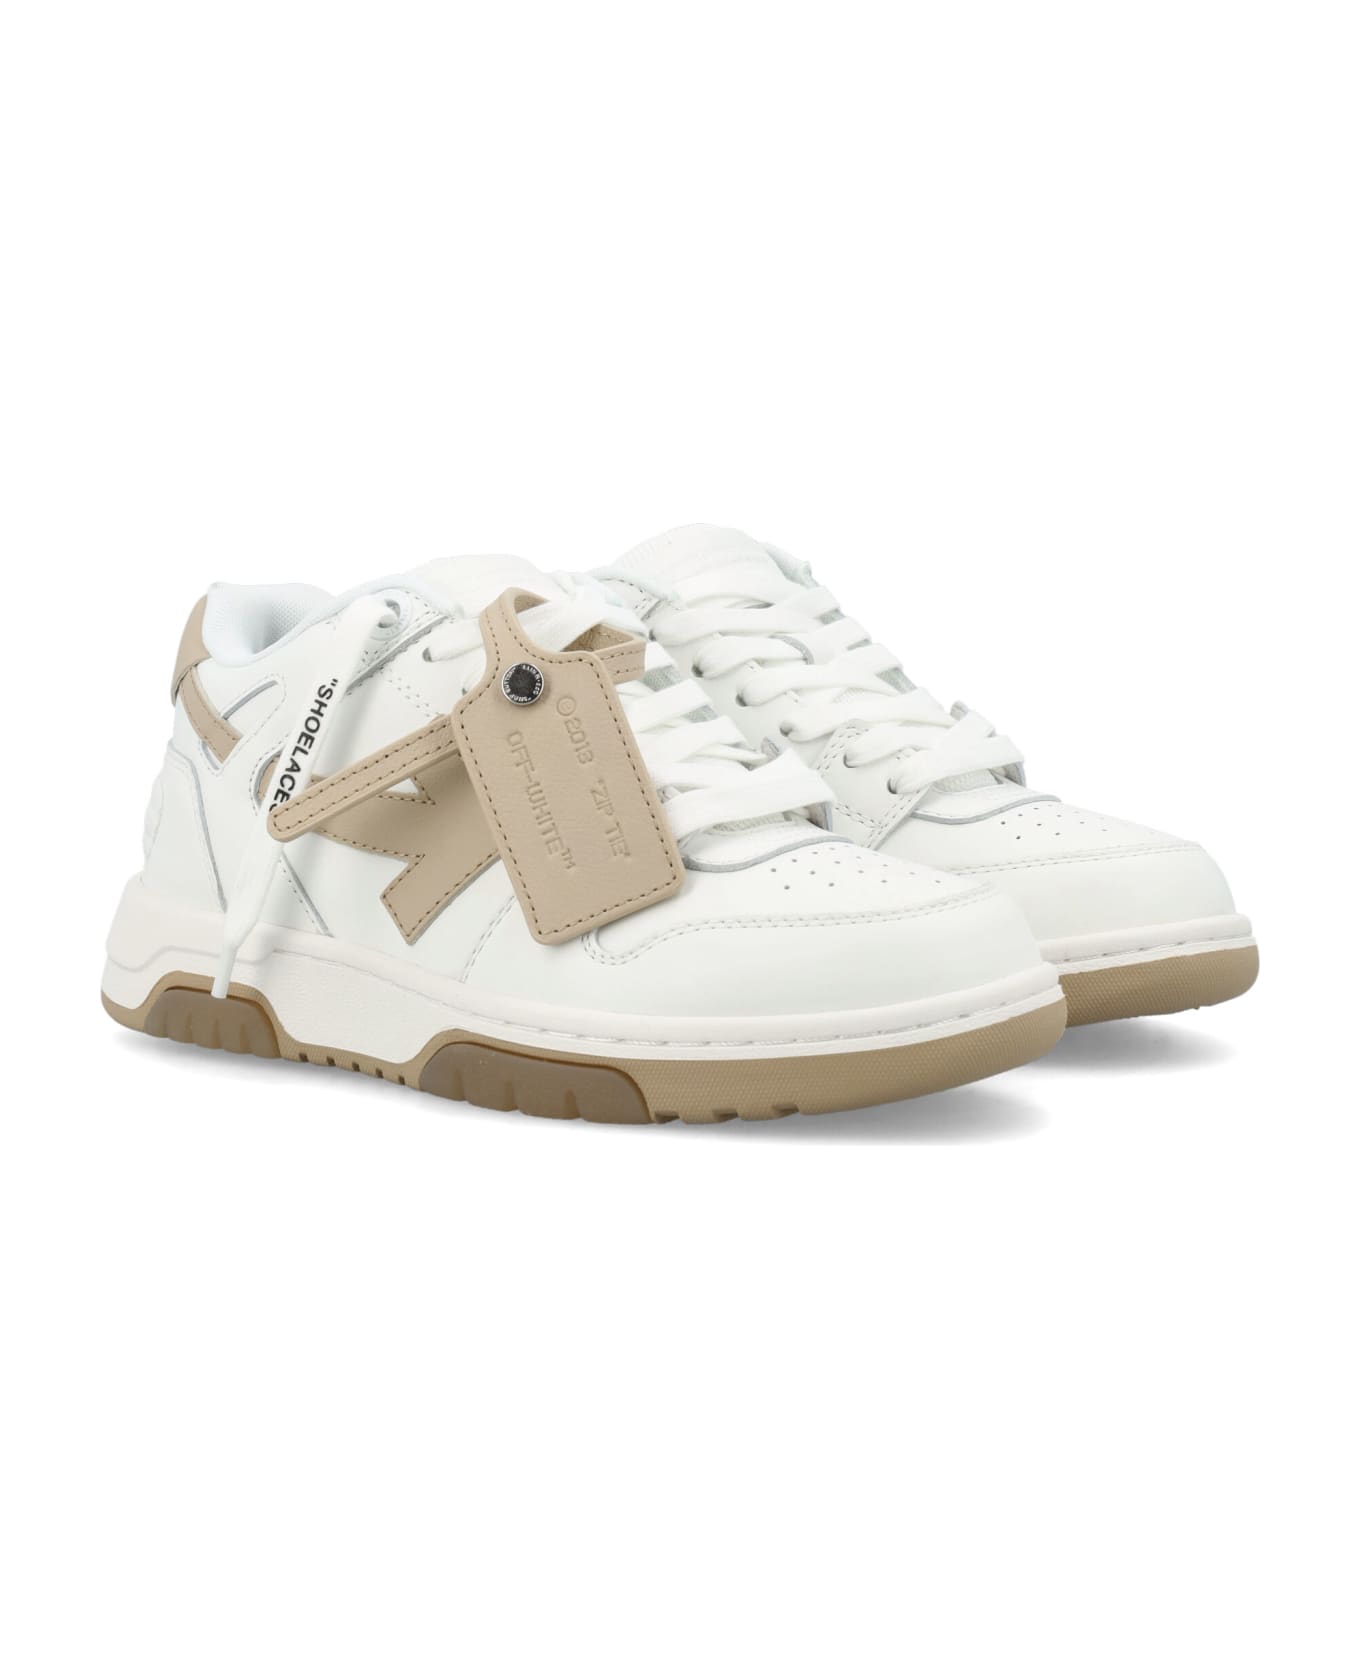 Off-White Out Of Office Woman's Sneakers - WHITE SEND